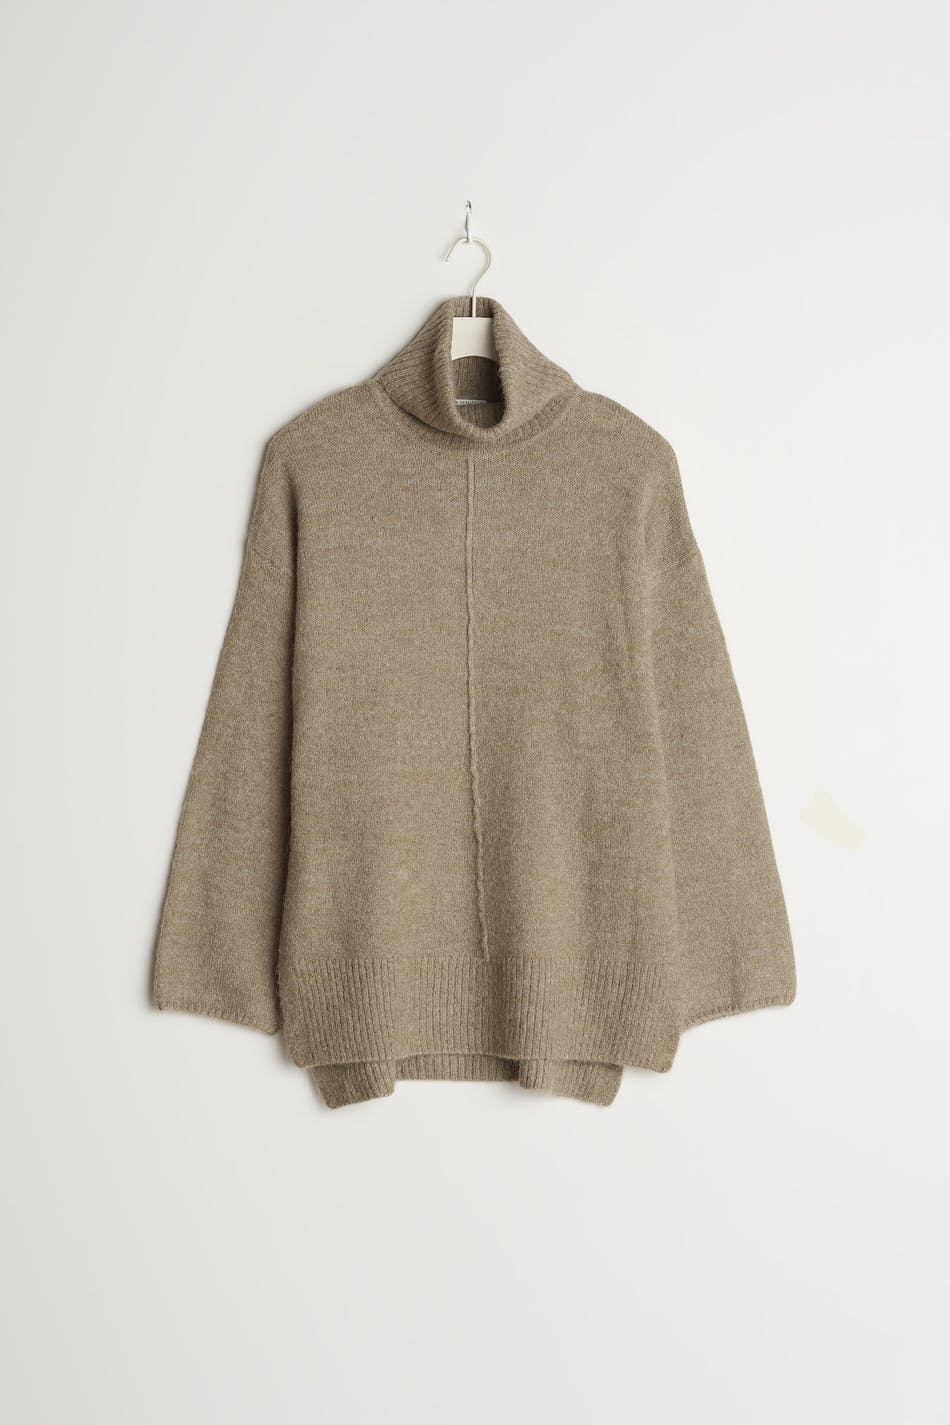 Tove petite knitted sweater